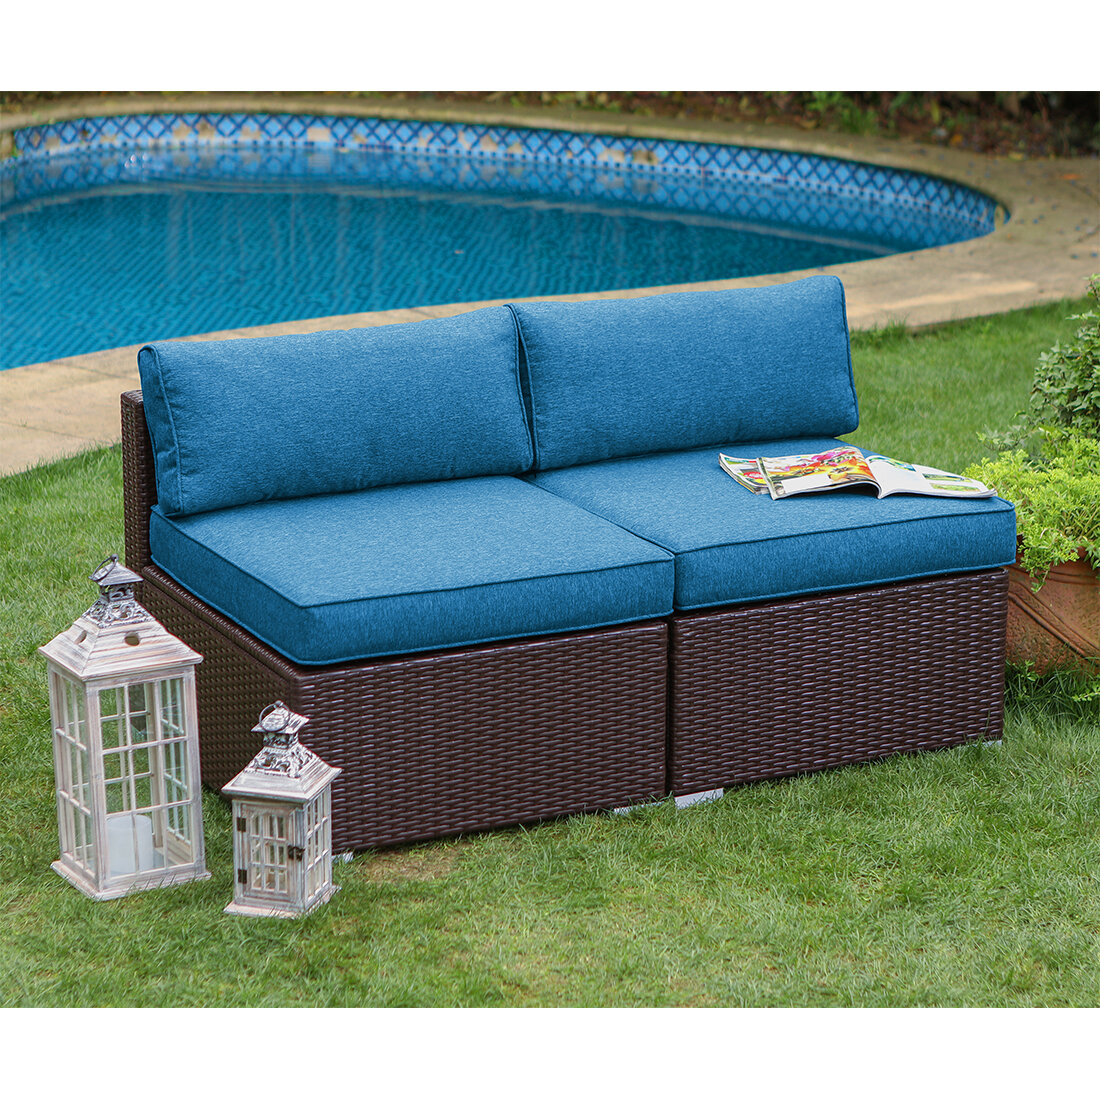 Black Steel Frame All Weather Wicker Sectional Sofa Chair with Blue Removable Cushions JOYFEEL Outdoor Loveaseat 2 Corner Sofa Chairs